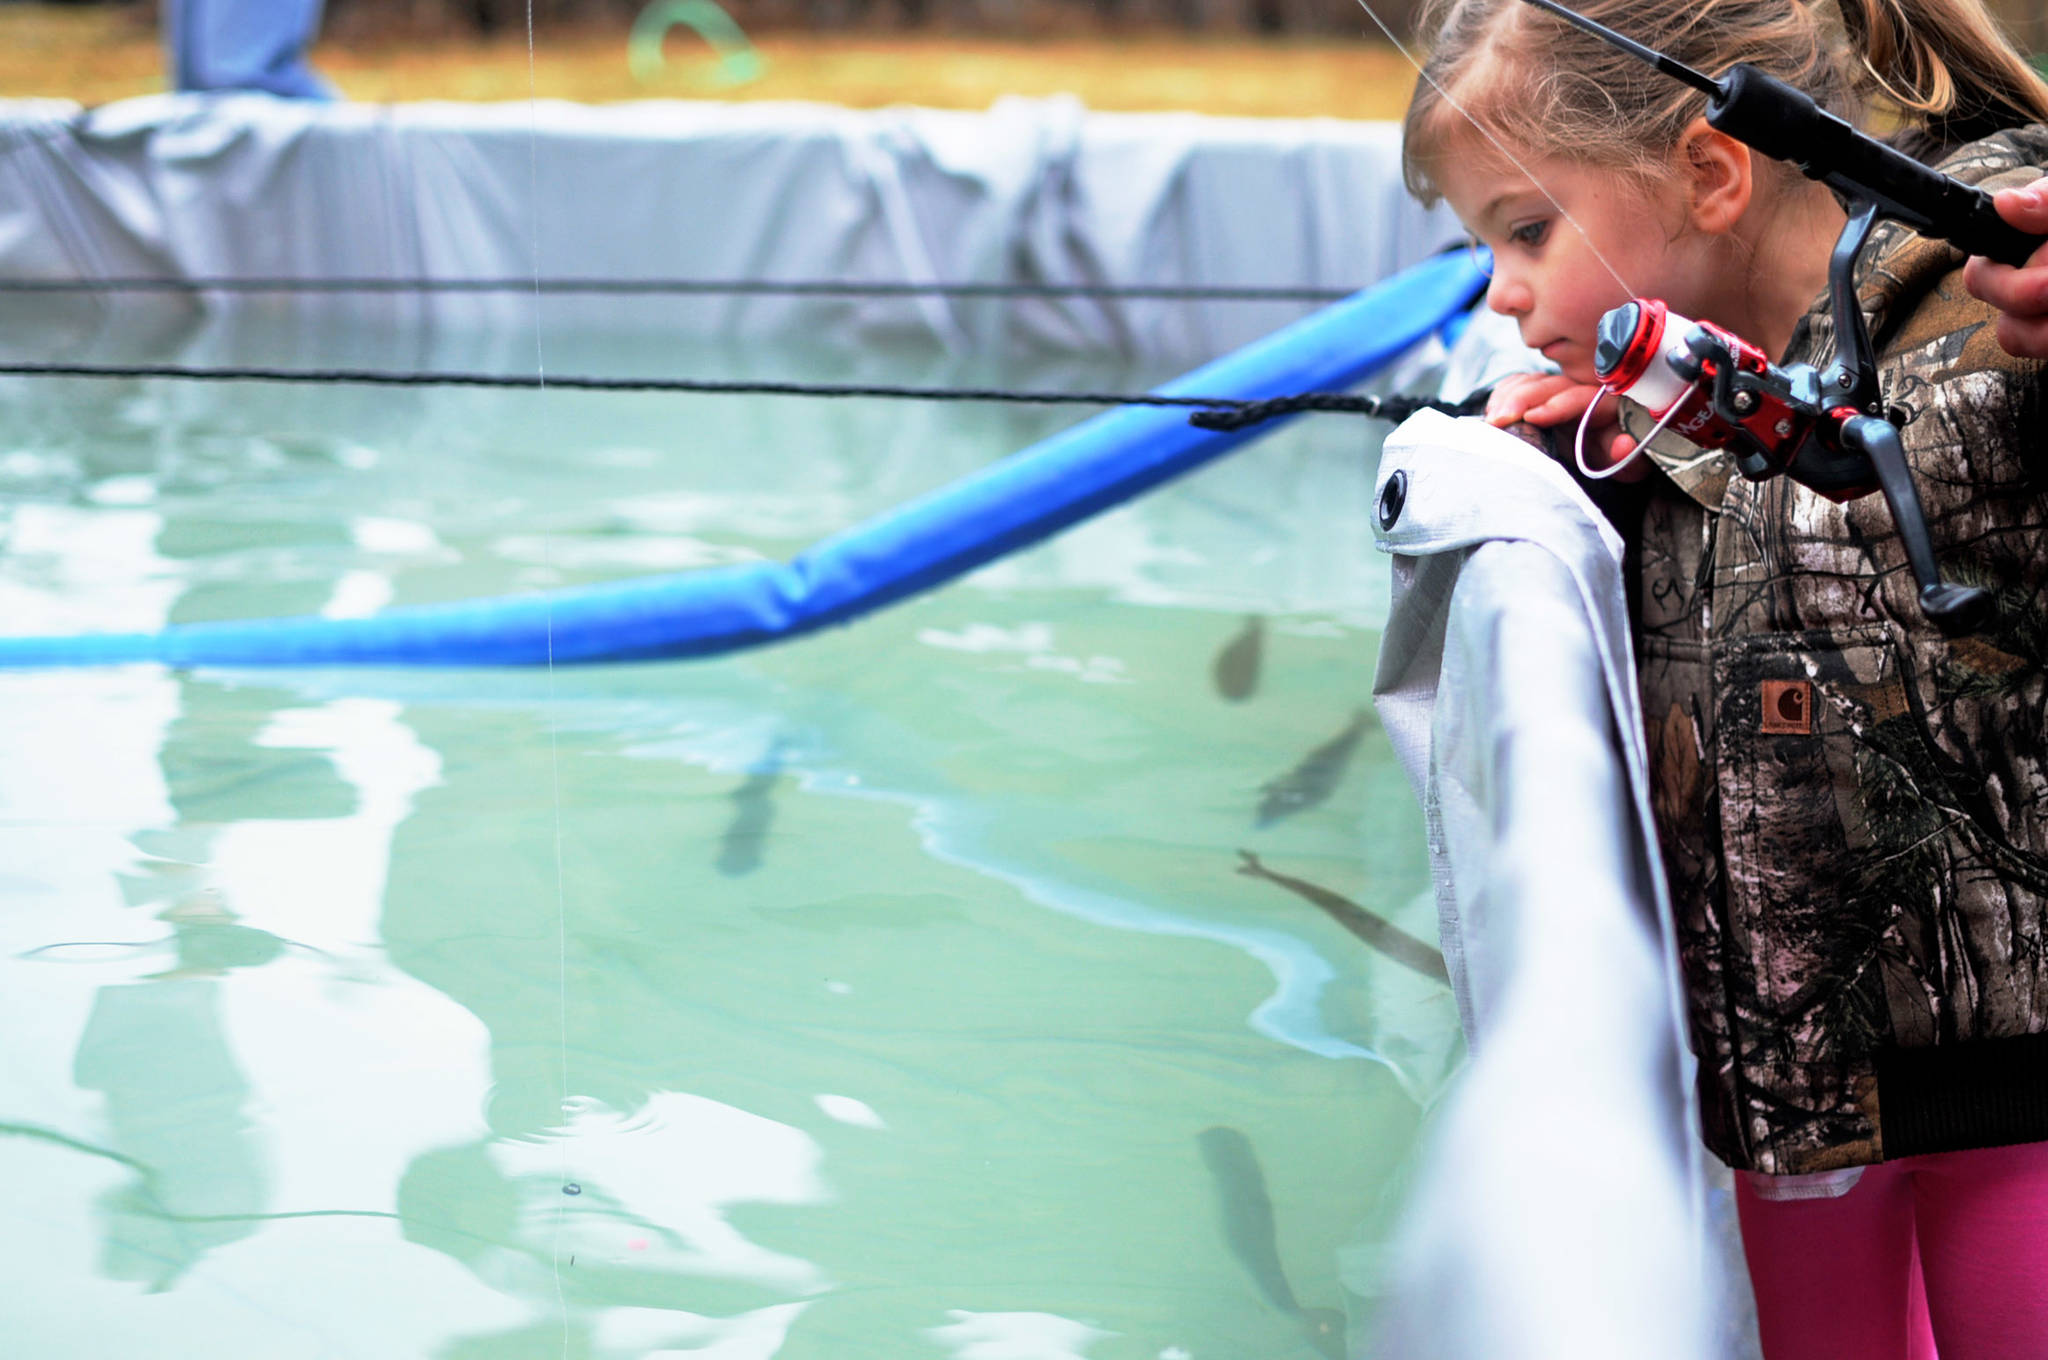 A child watches as her line and weight sink into the water at an Alaska Department of Fish and Game-stocked fish pond at the annual Sports and Rec Trade Show at the Soldotna Regional Sports Complex on Sunday, April 29, 2018 in Soldotna, Alaska. (Photo by Elizabeth Earl/Peninsula Clarion)